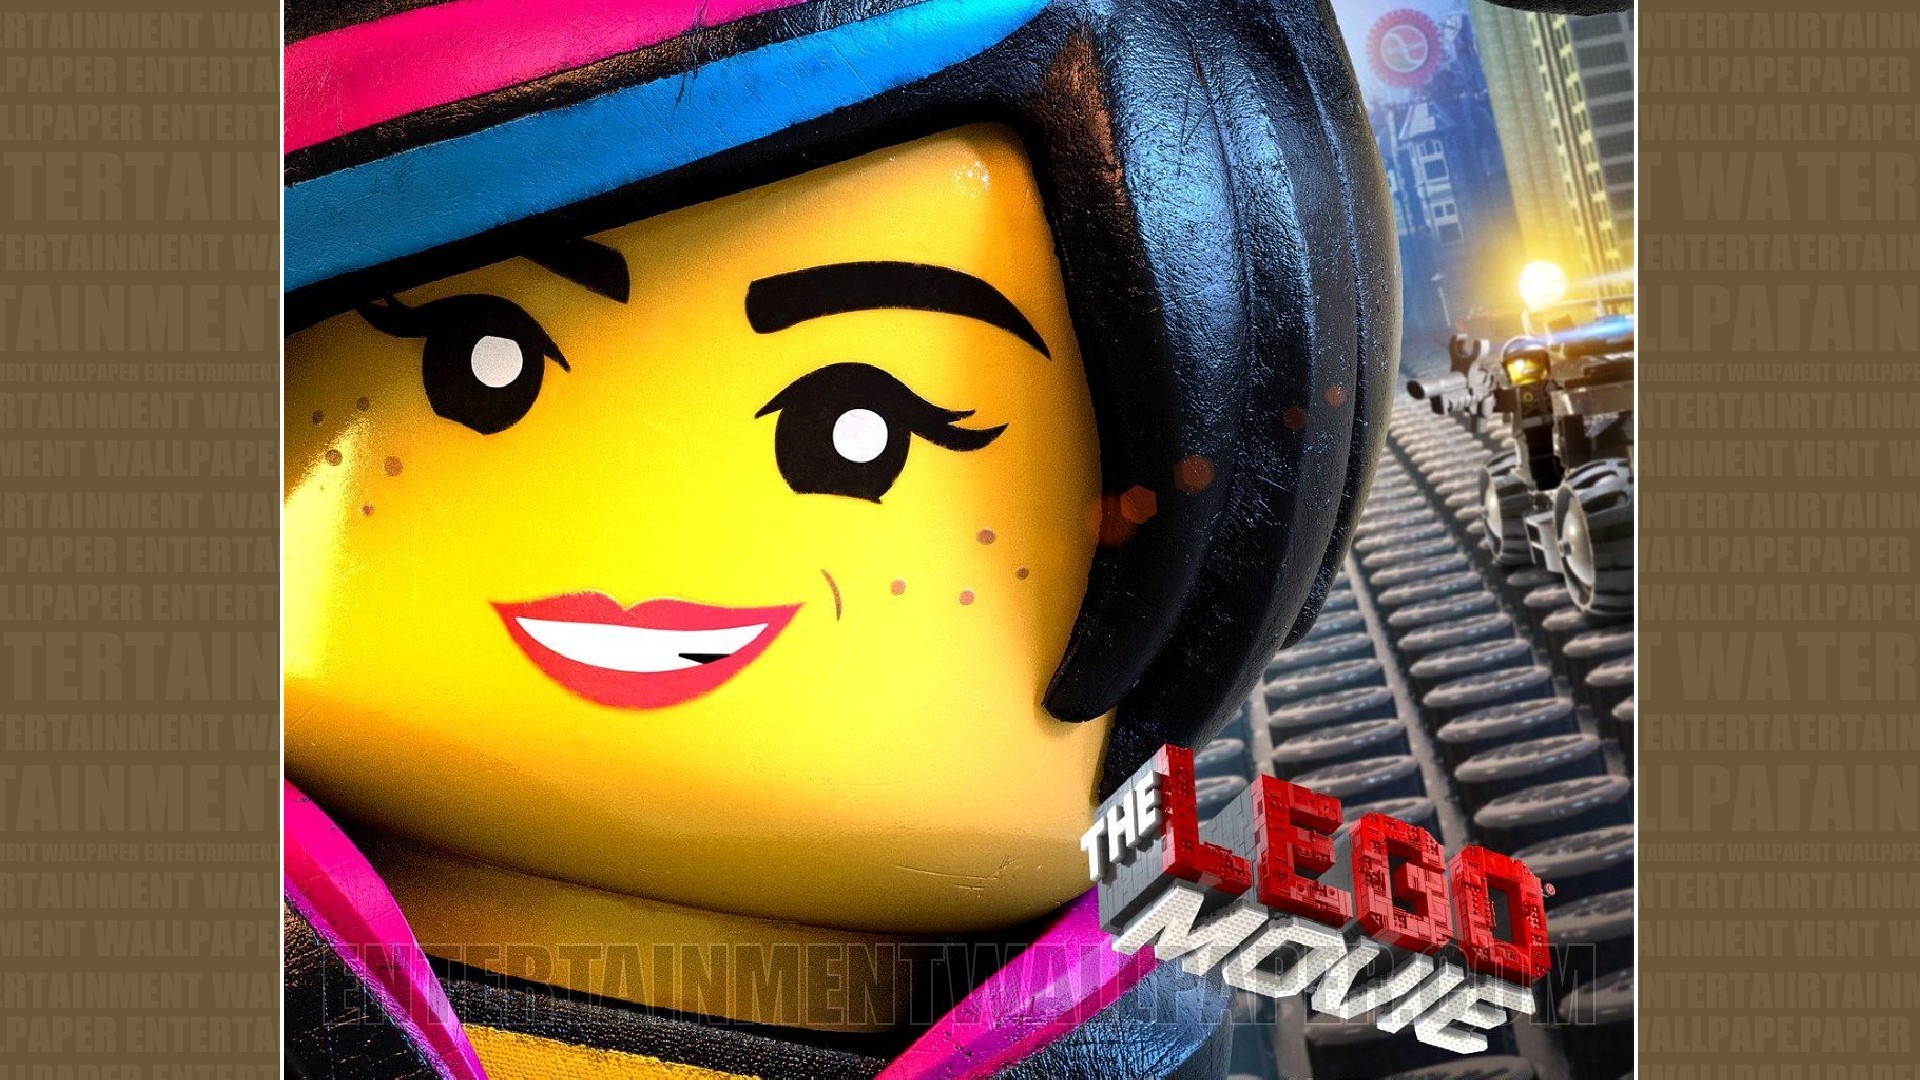 1920x1080 The Lego Movie Wallpaper - Original size, download now.